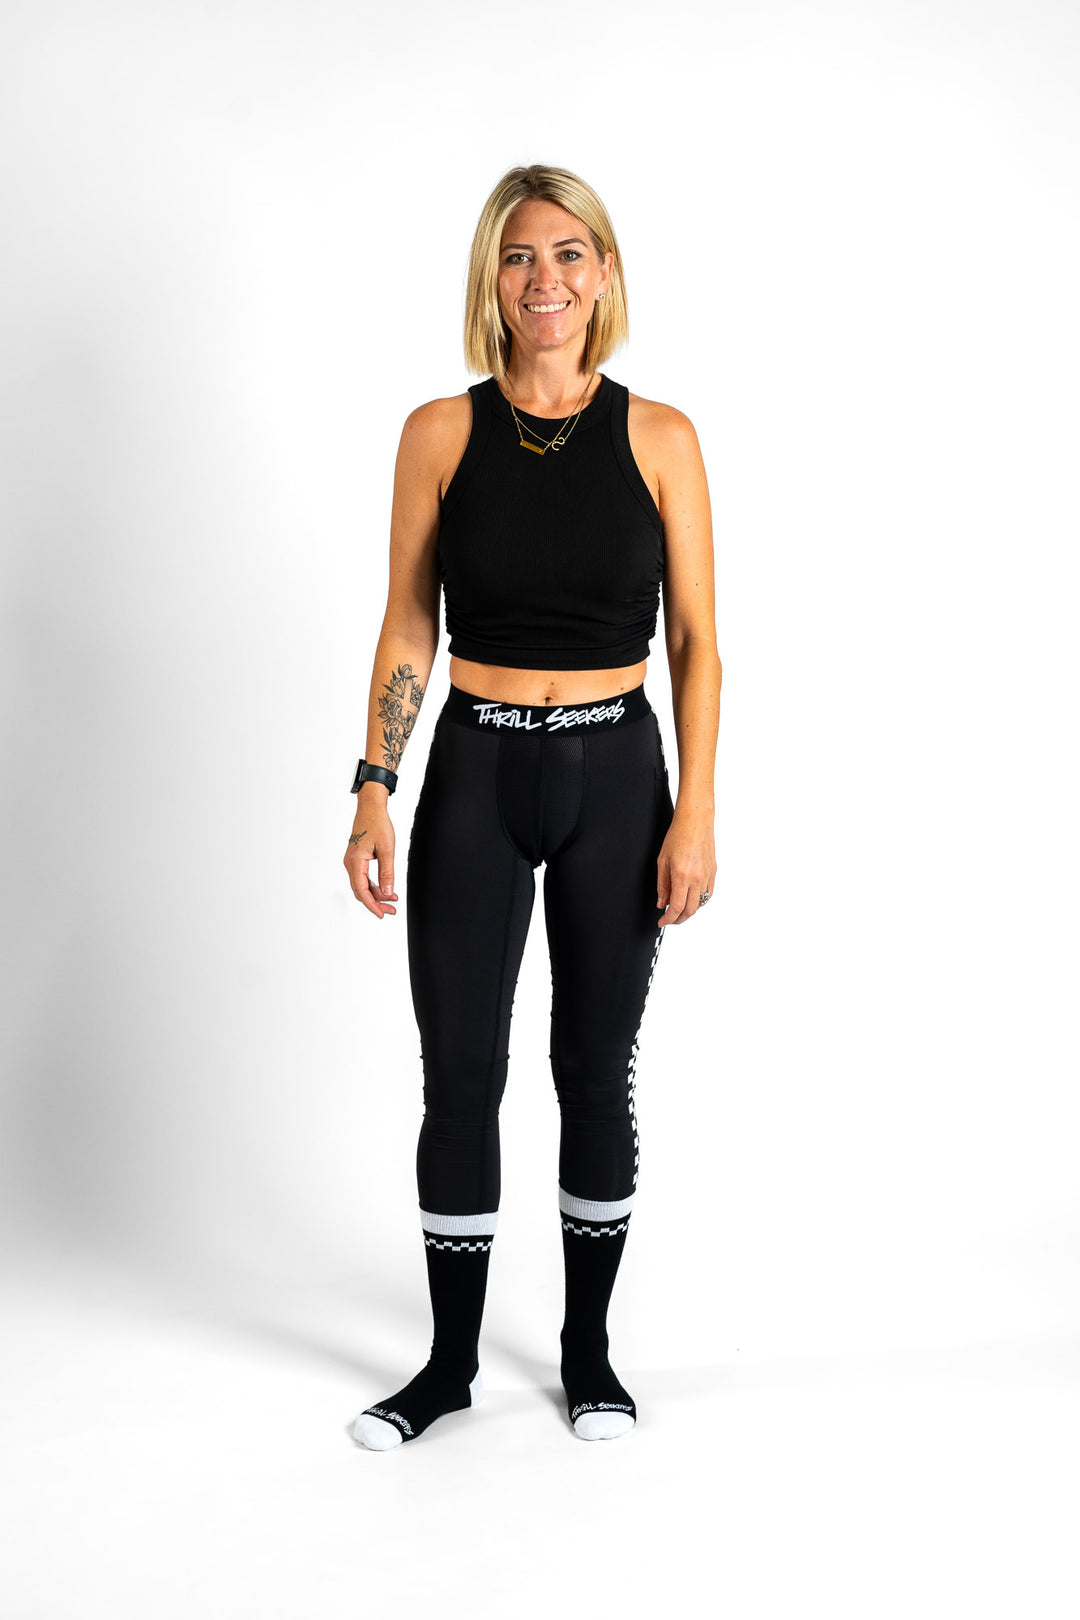 Thrill Seekers Moto Leggings – Rival Ink Design Co